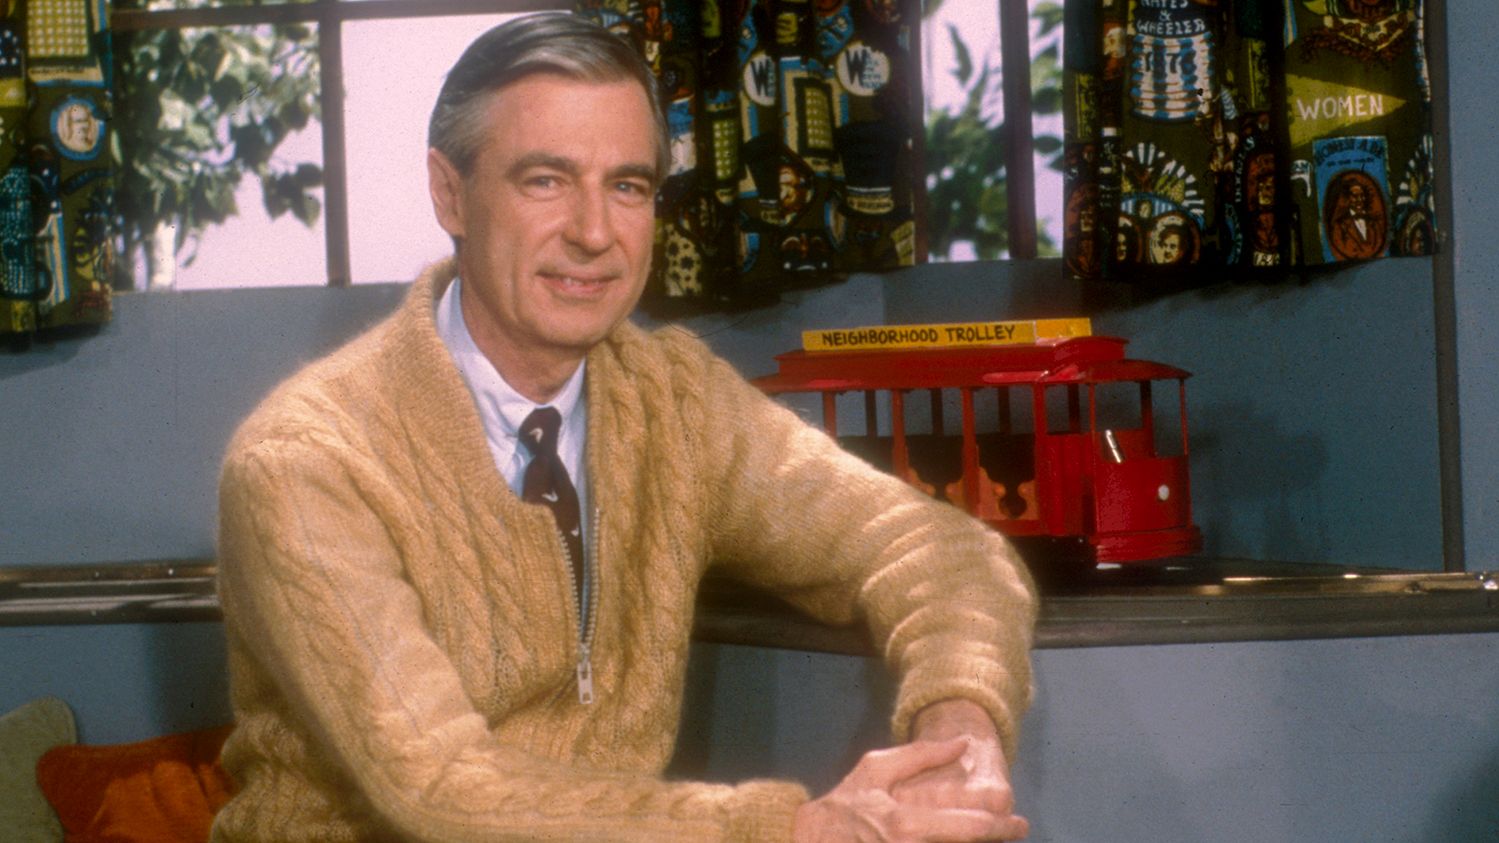 Mister Rodgers with trolley photo